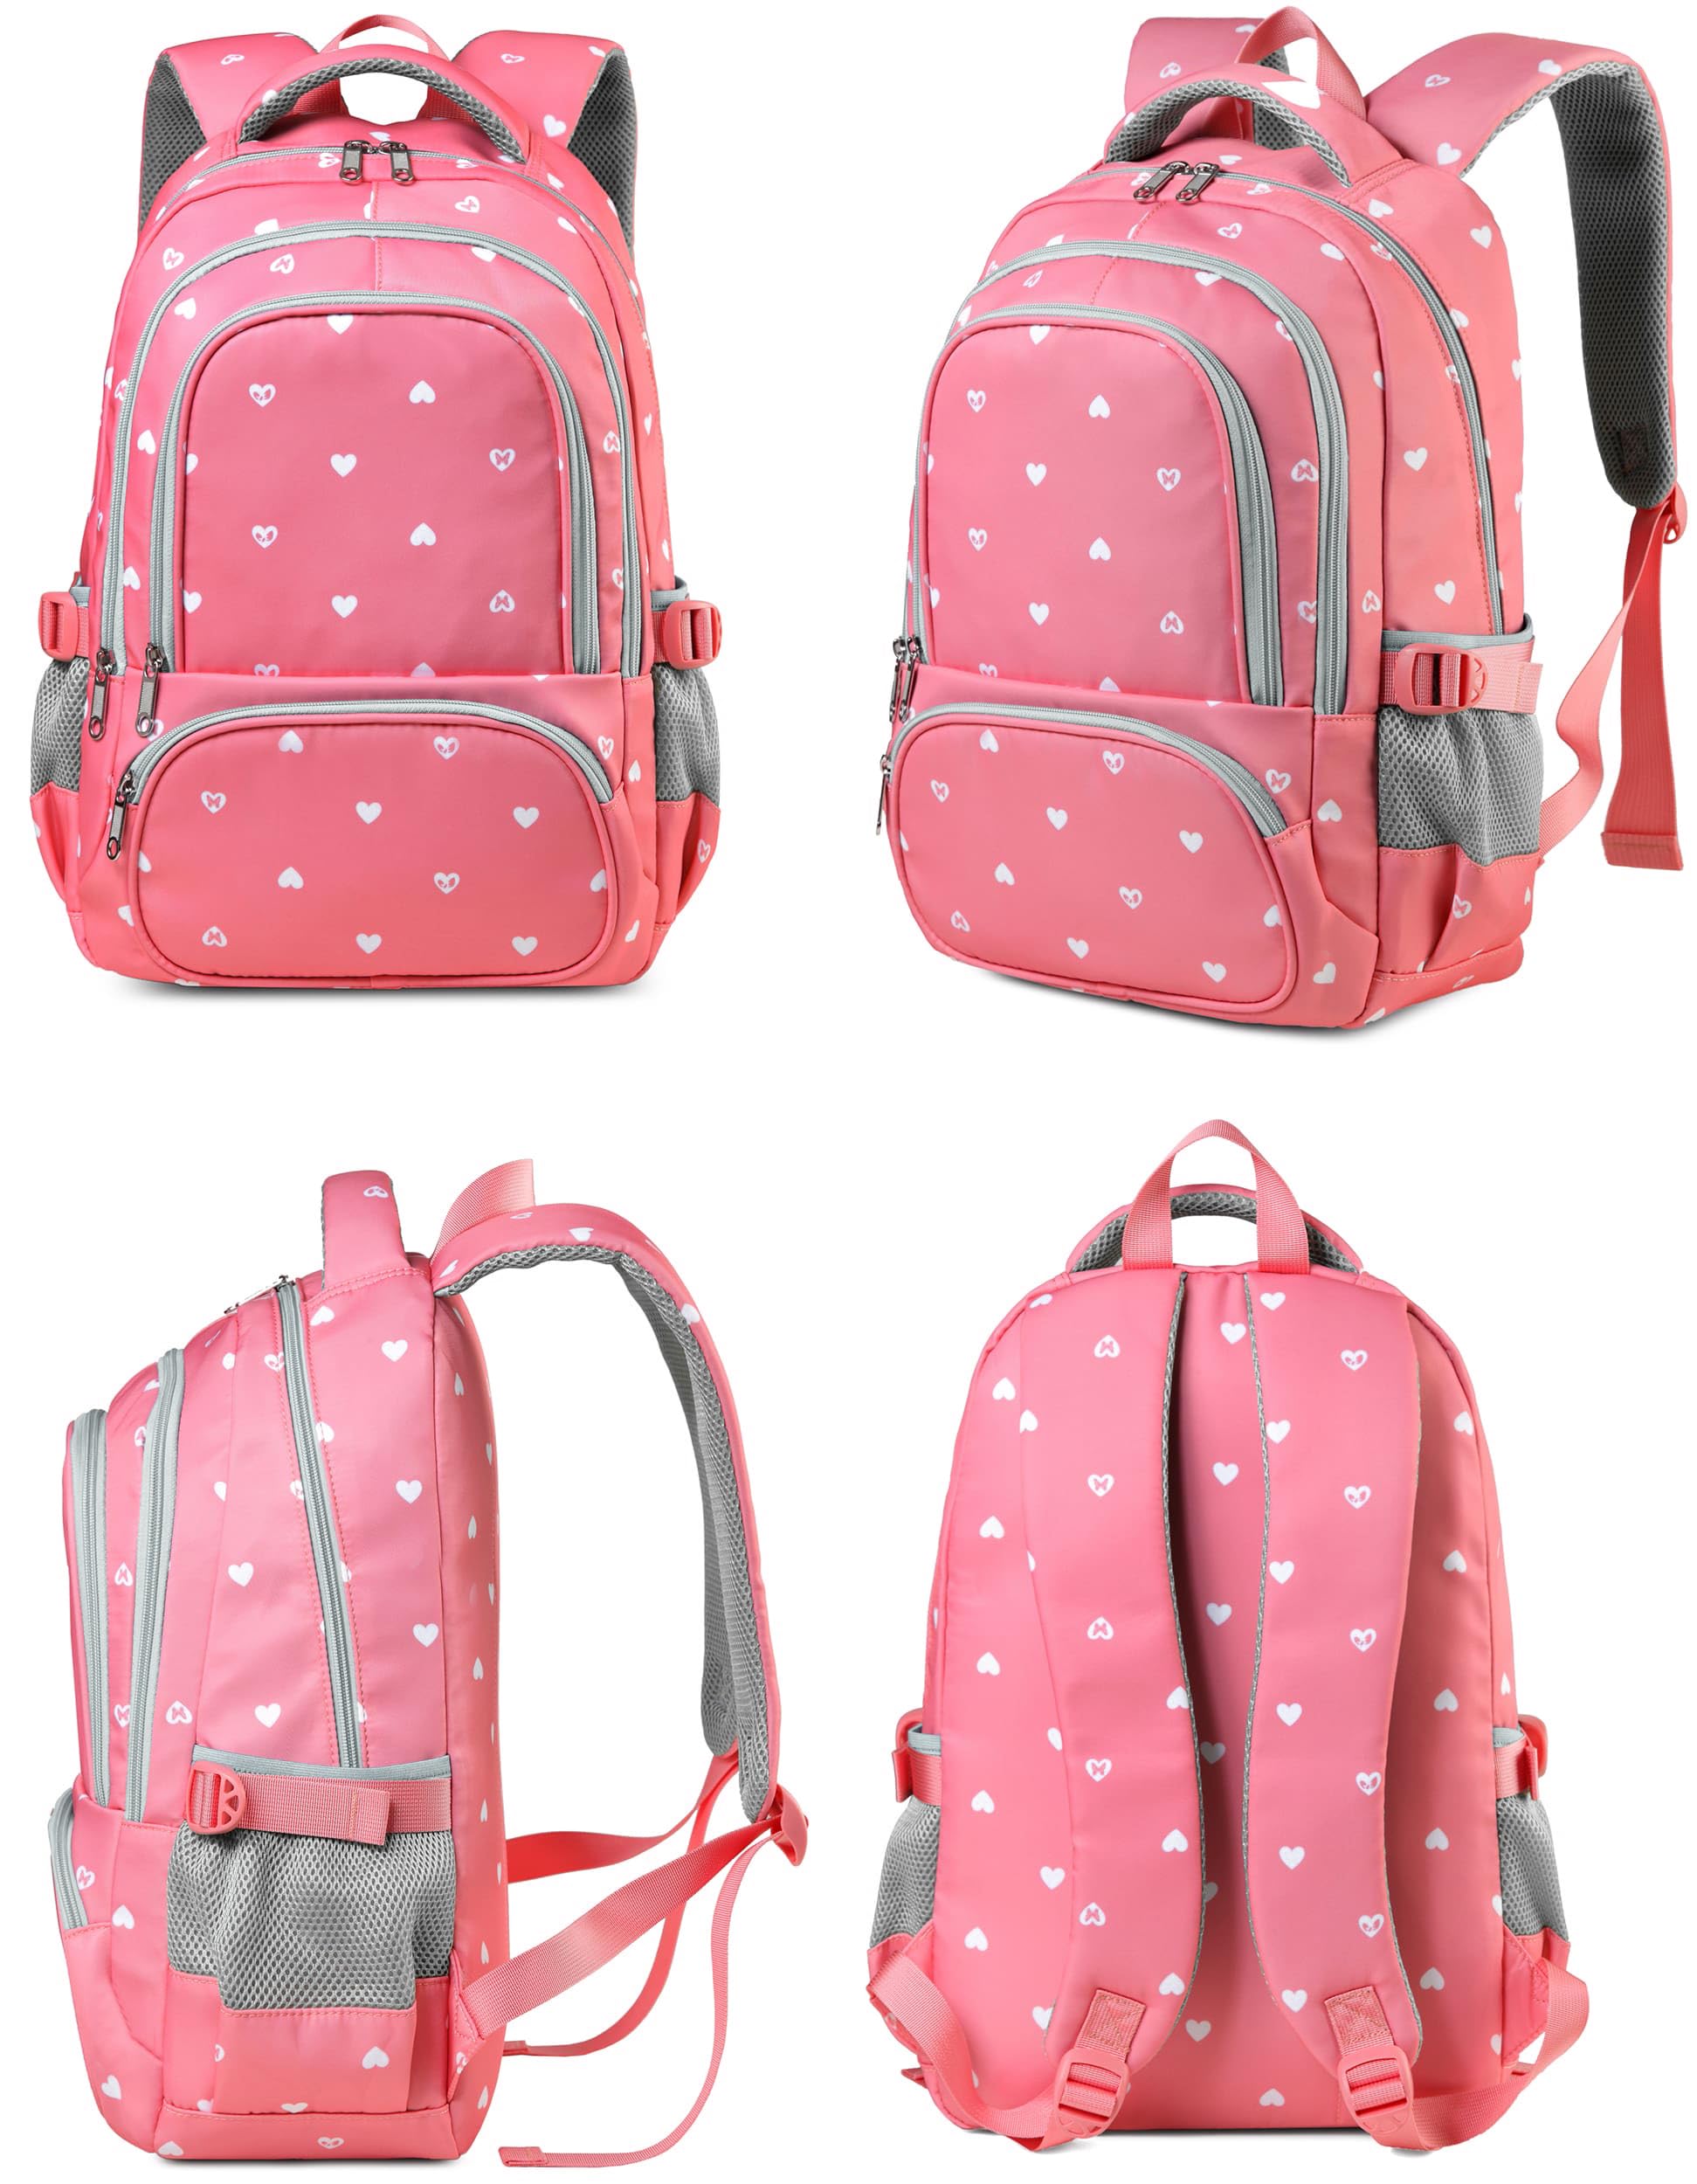 BLUEFAIRY Lightweight Water Resistant Backpack for Girls, Pink, 5-9 Years, Laptop Compartment, Adjustable Shoulder Straps, Breathable Mesh